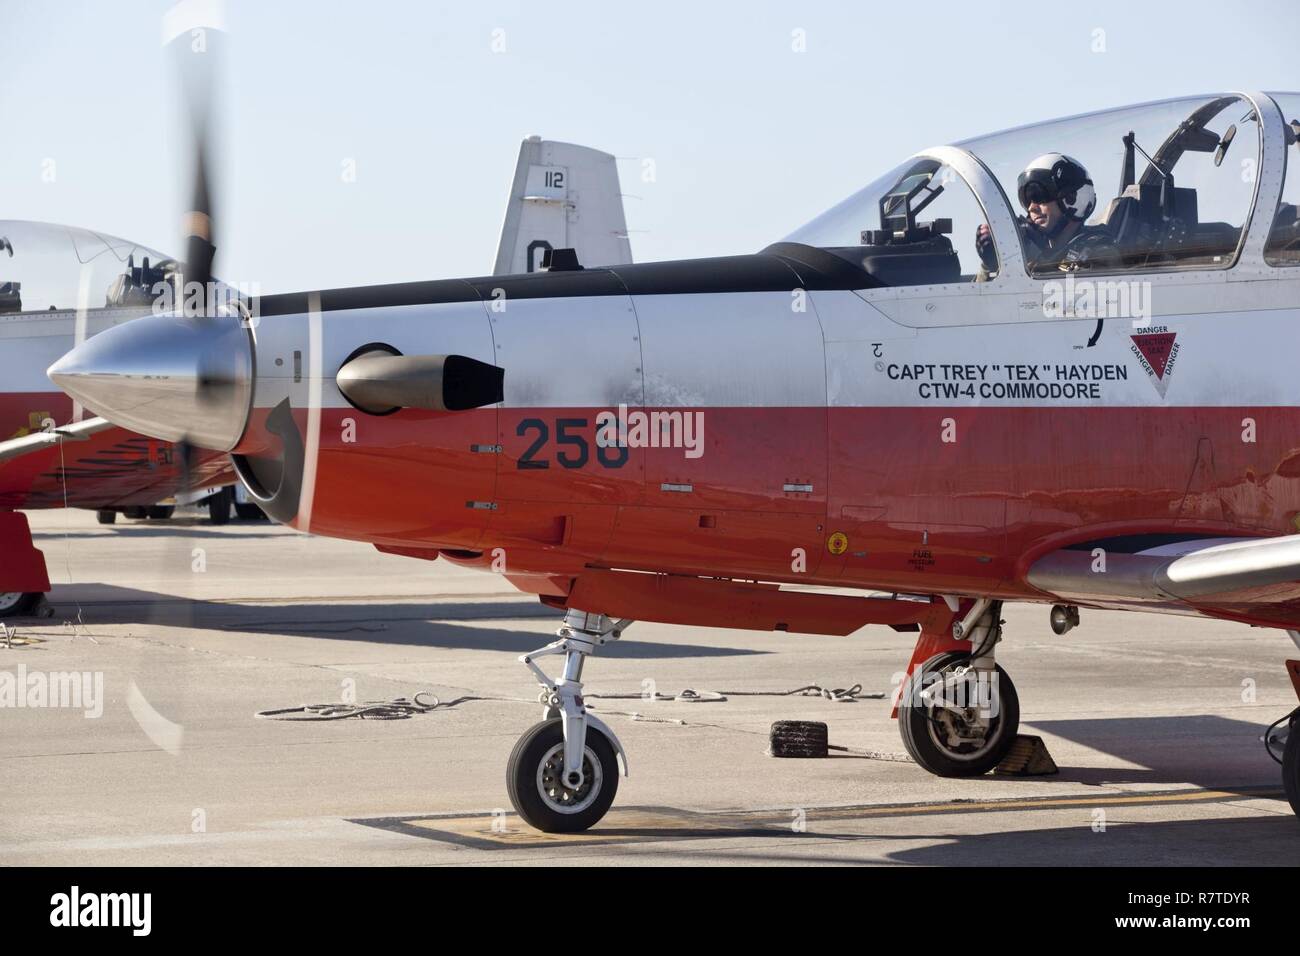 U.S. Marine Corps officers assigned to the Basic Flight Training Course, Training Air Wing Four, conduct a preflight check on a T-6B training aircraft at Naval Air Station Corpus Christi, Texas, March 20, 2017. The mission of Training Air Wing Four is to provide basic flight training as well as intermediate and advanced flight training using multi-engine aircraft. Stock Photo